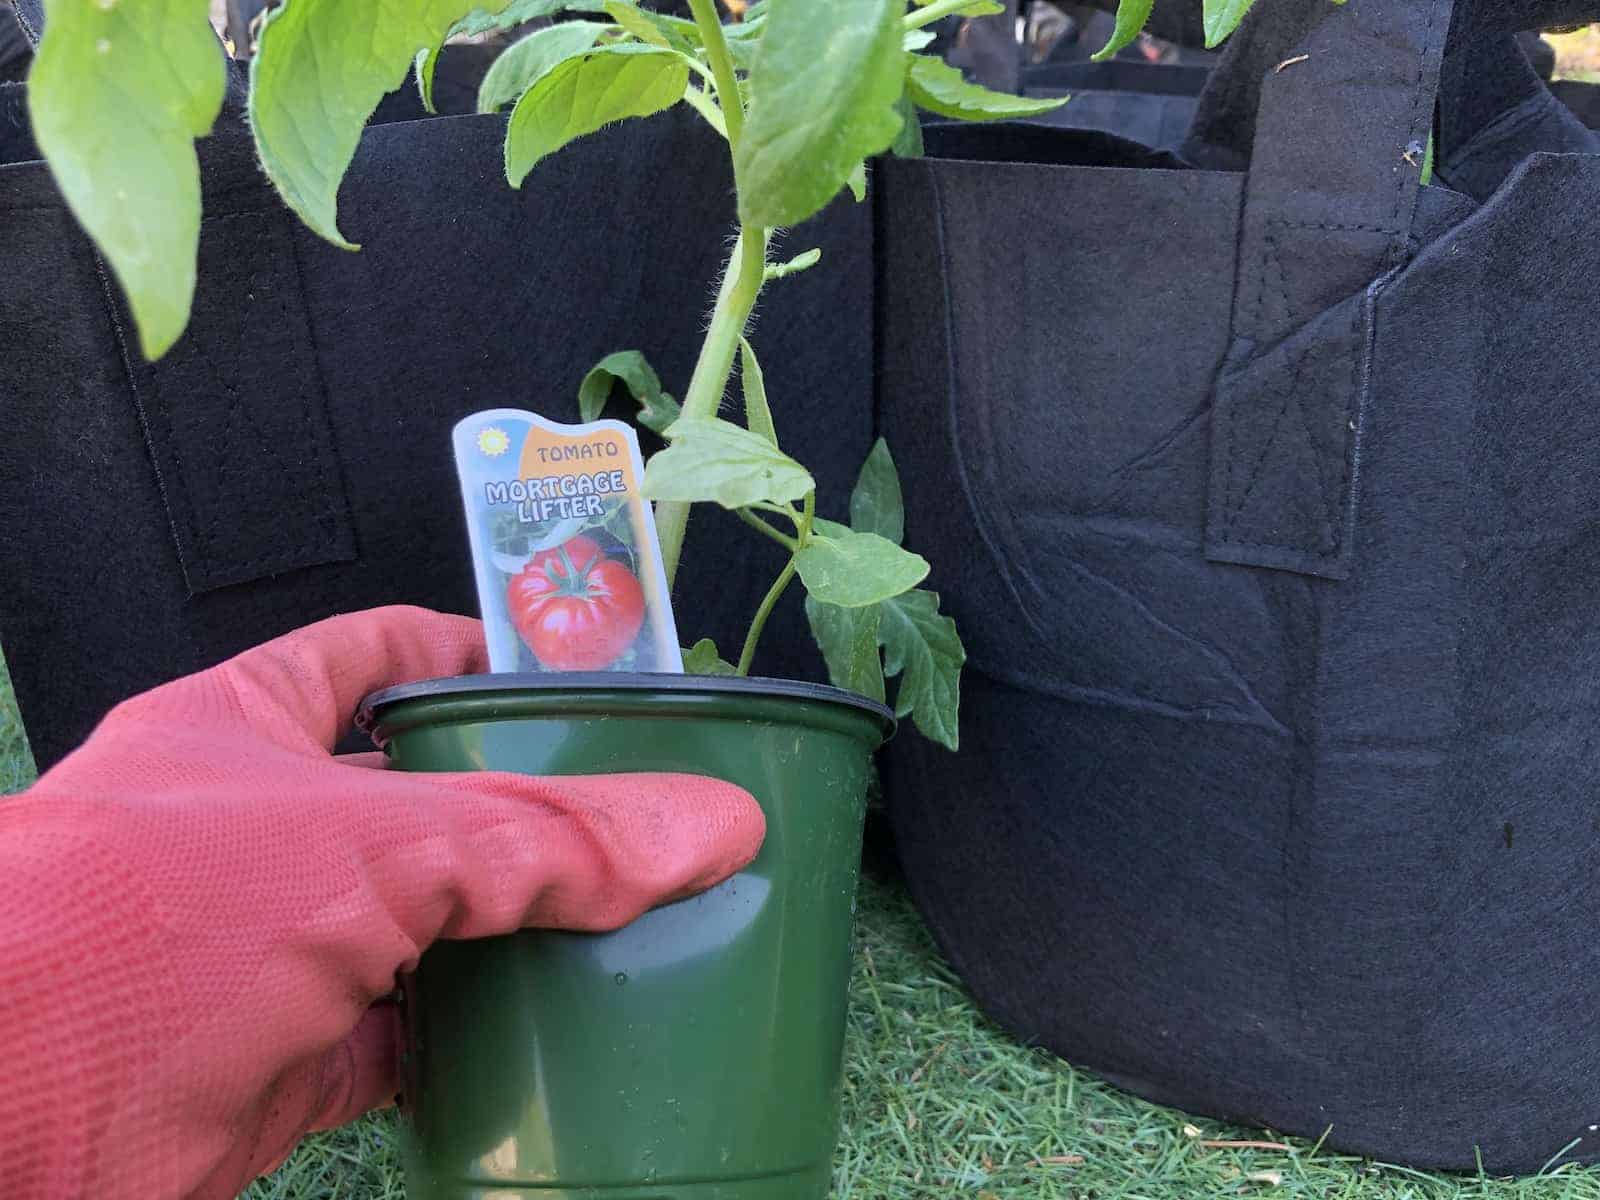 Mortgage lifter tomato seedling plant